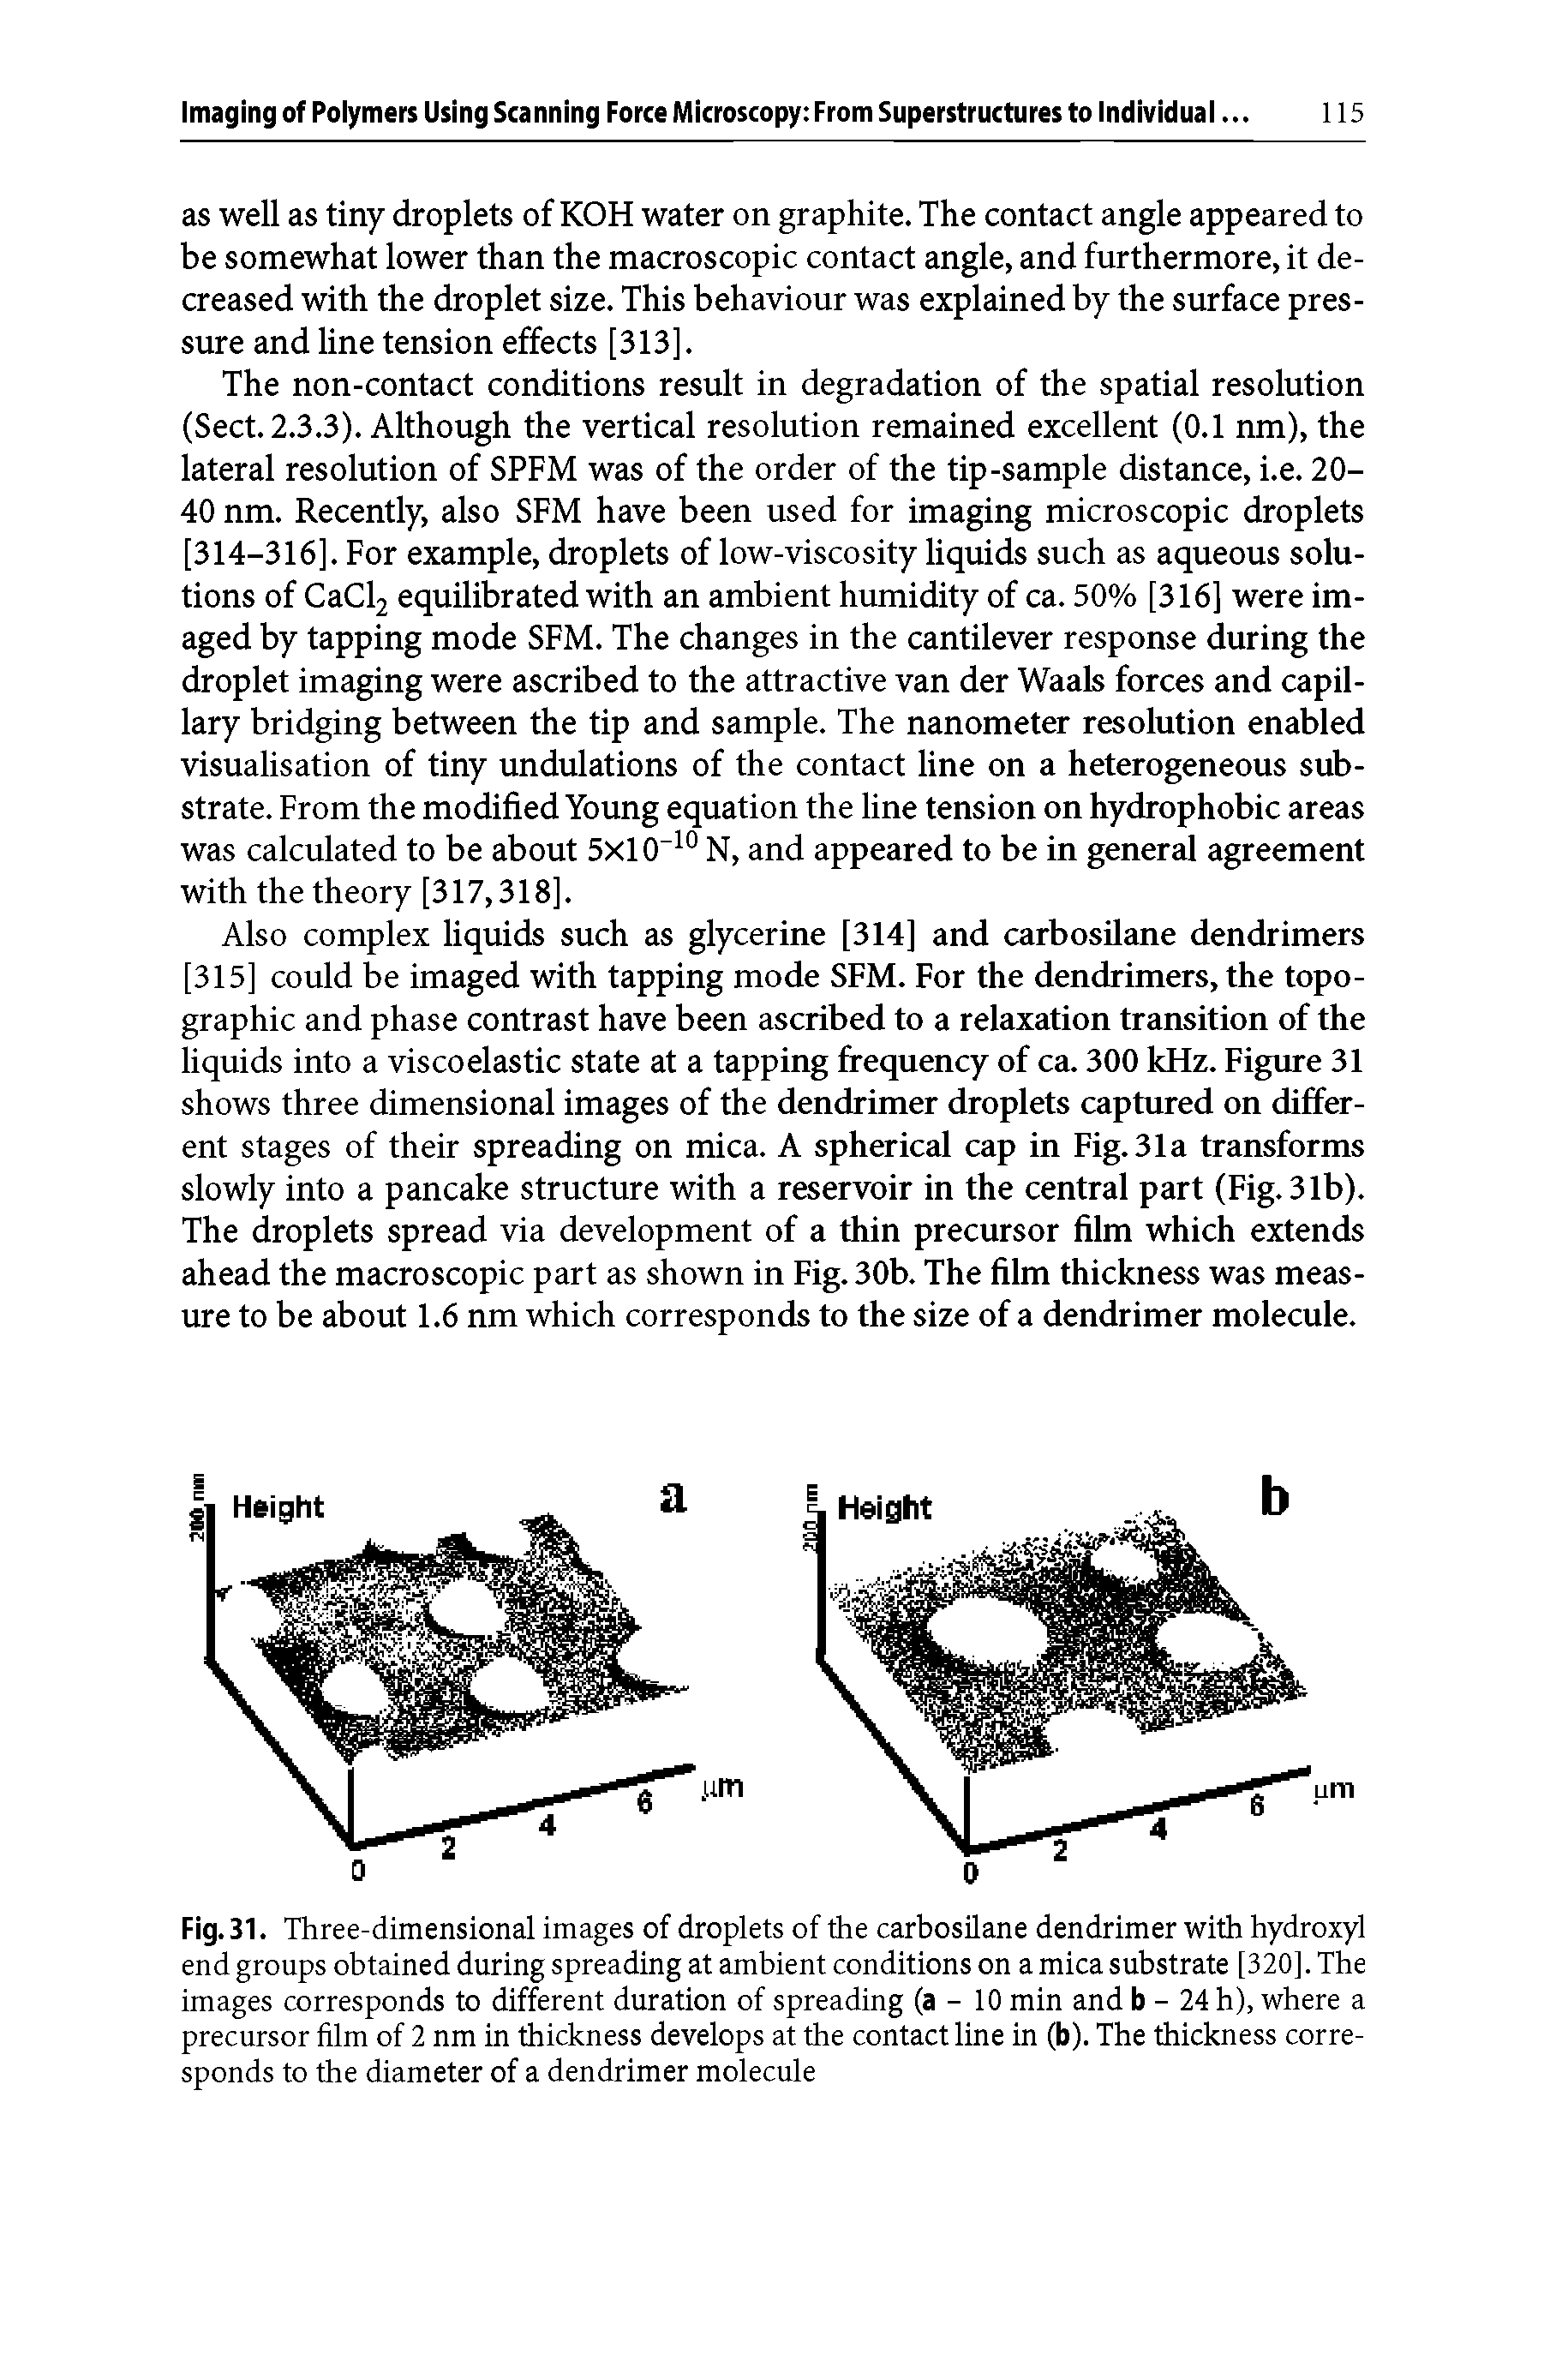 Fig. 31. Three-dimensional images of droplets of the carbosilane dendrimer with hydroxyl end groups obtained during spreading at ambient conditions on a mica substrate [320]. The images corresponds to different duration of spreading (a - 10 min and b - 24 h), where a precursor film of 2 nm in thickness develops at the contact line in (b). The thickness corresponds to the diameter of a dendrimer molecule...